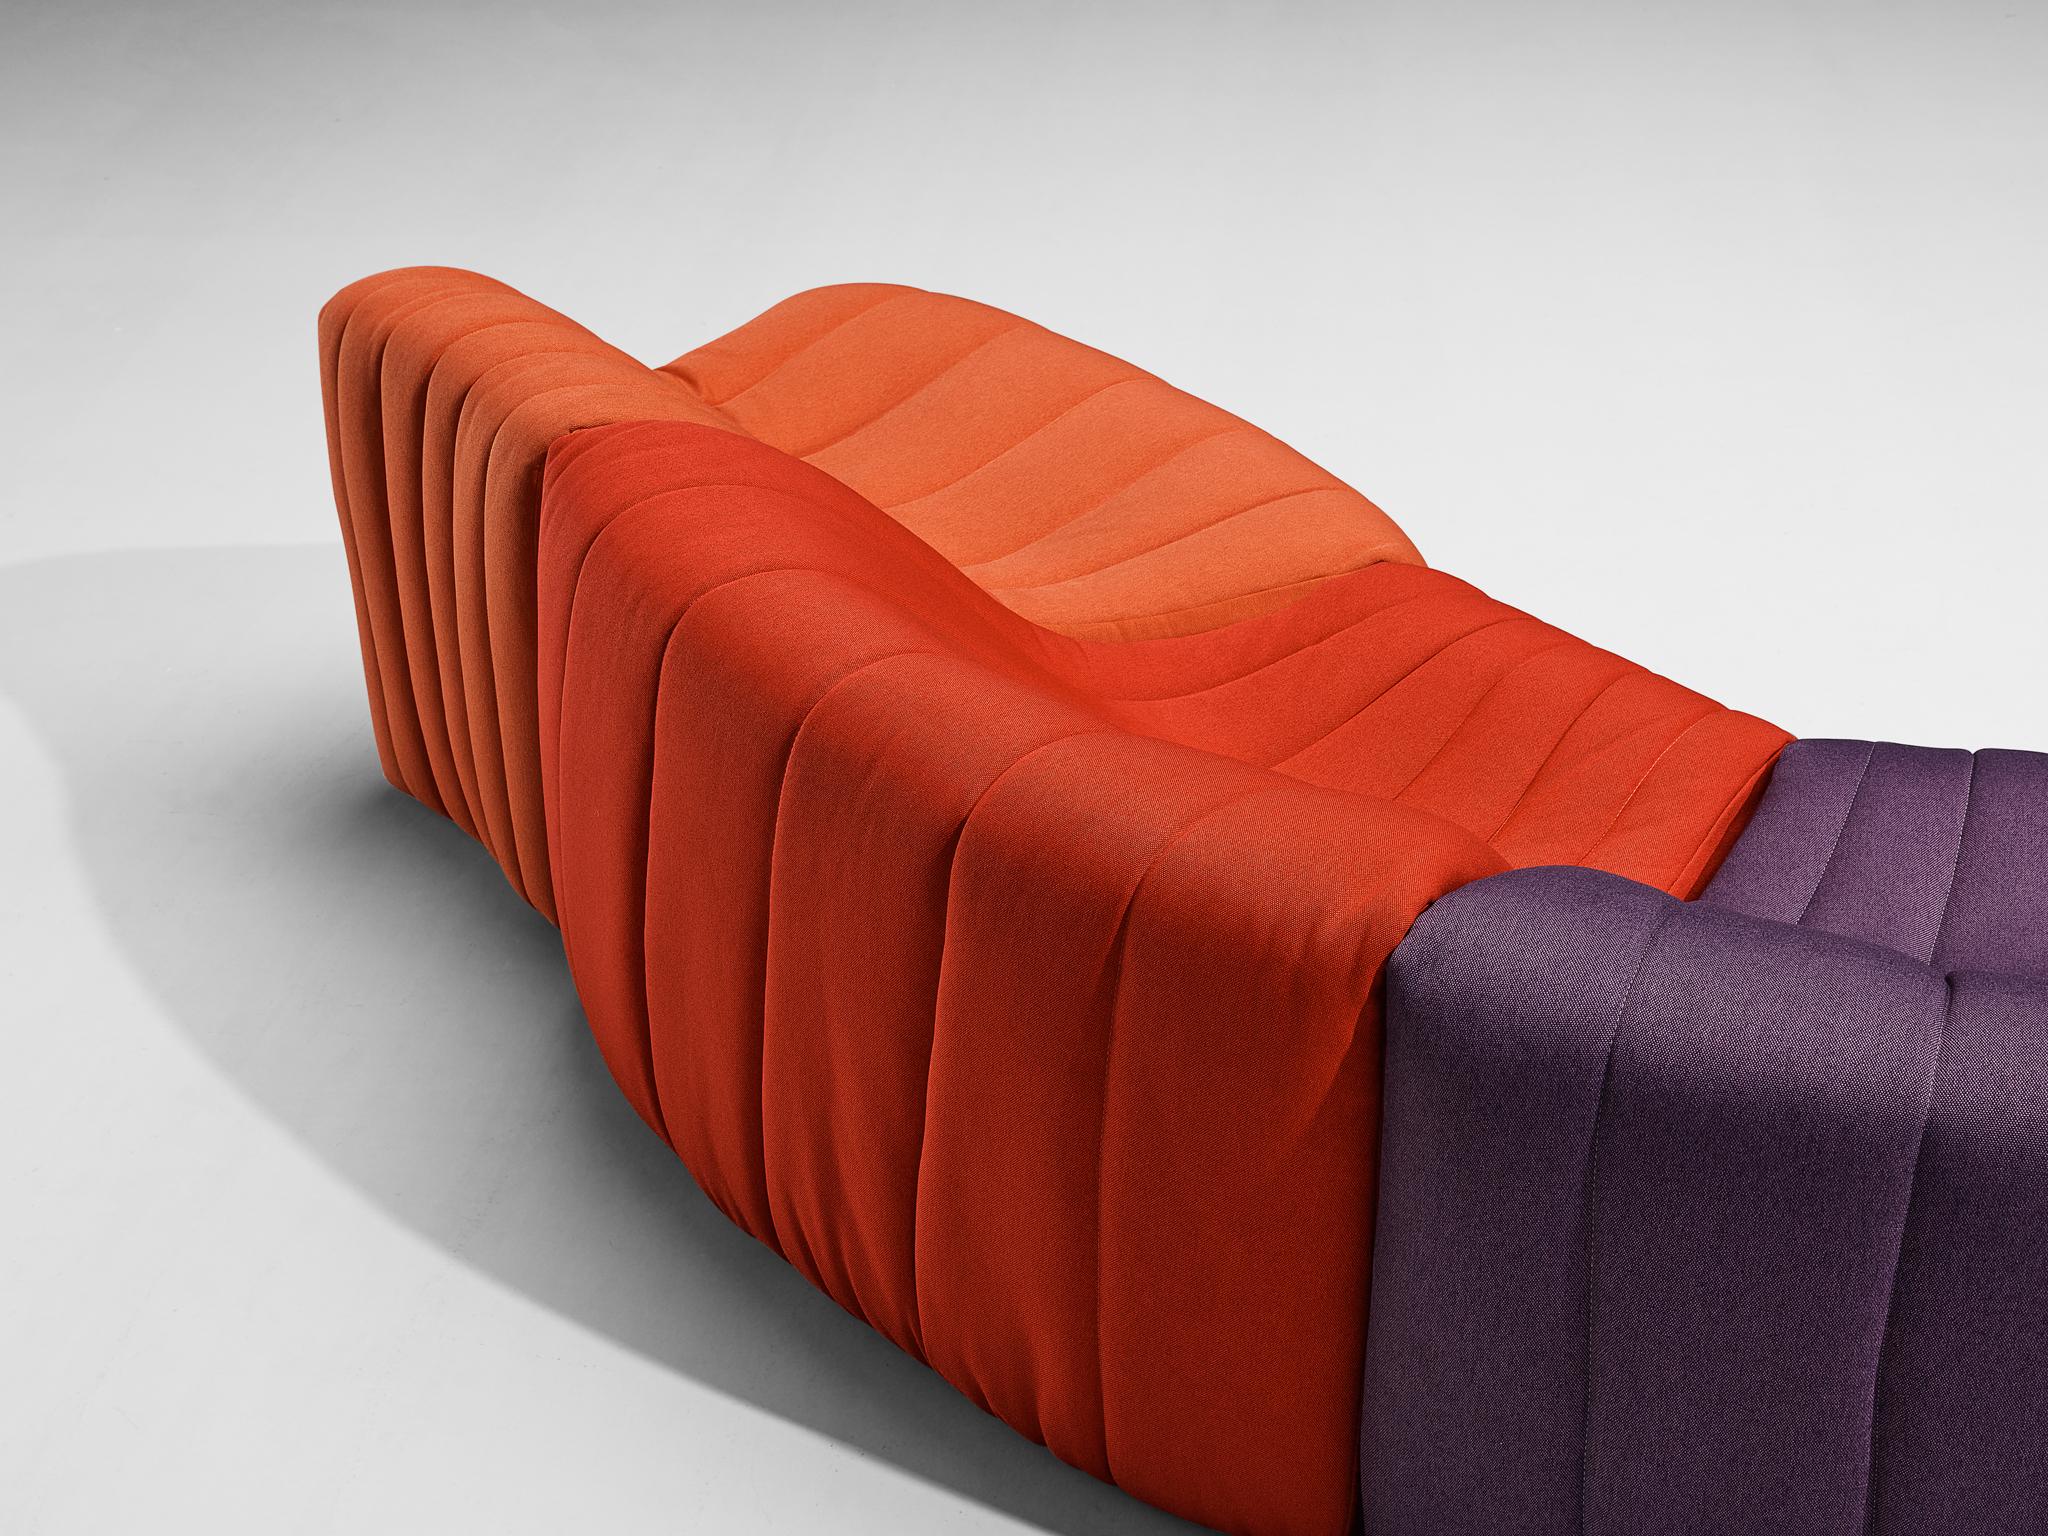 Late 20th Century Kwok Hoi Chan for Steiner 'Chromatic' Multicolored Modular Sofa